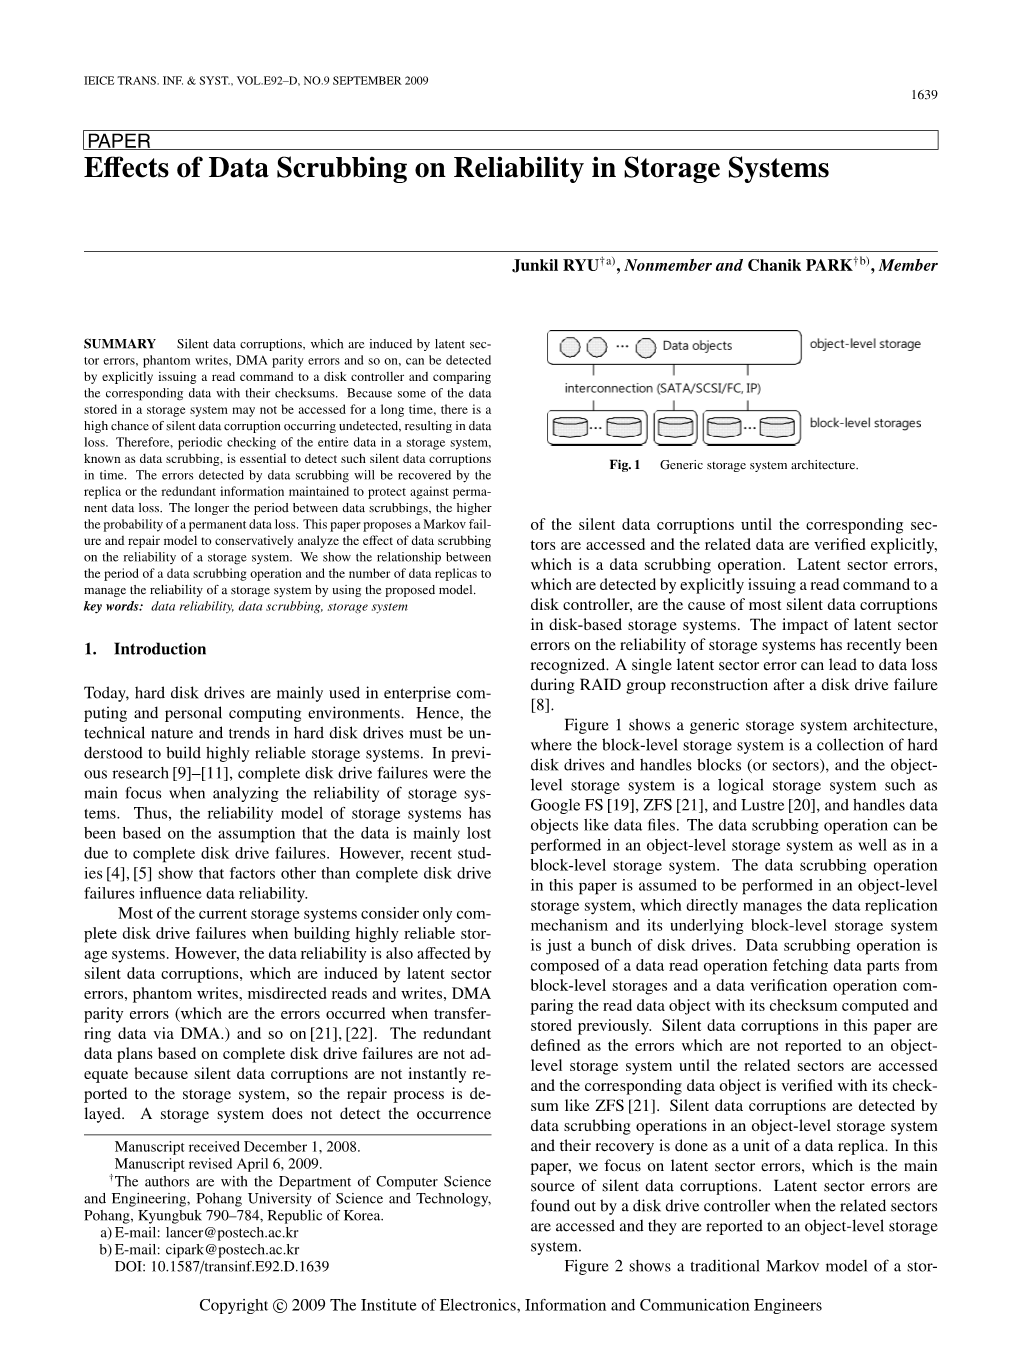 Effects of Data Scrubbing on Reliability in Storage Systems 1641